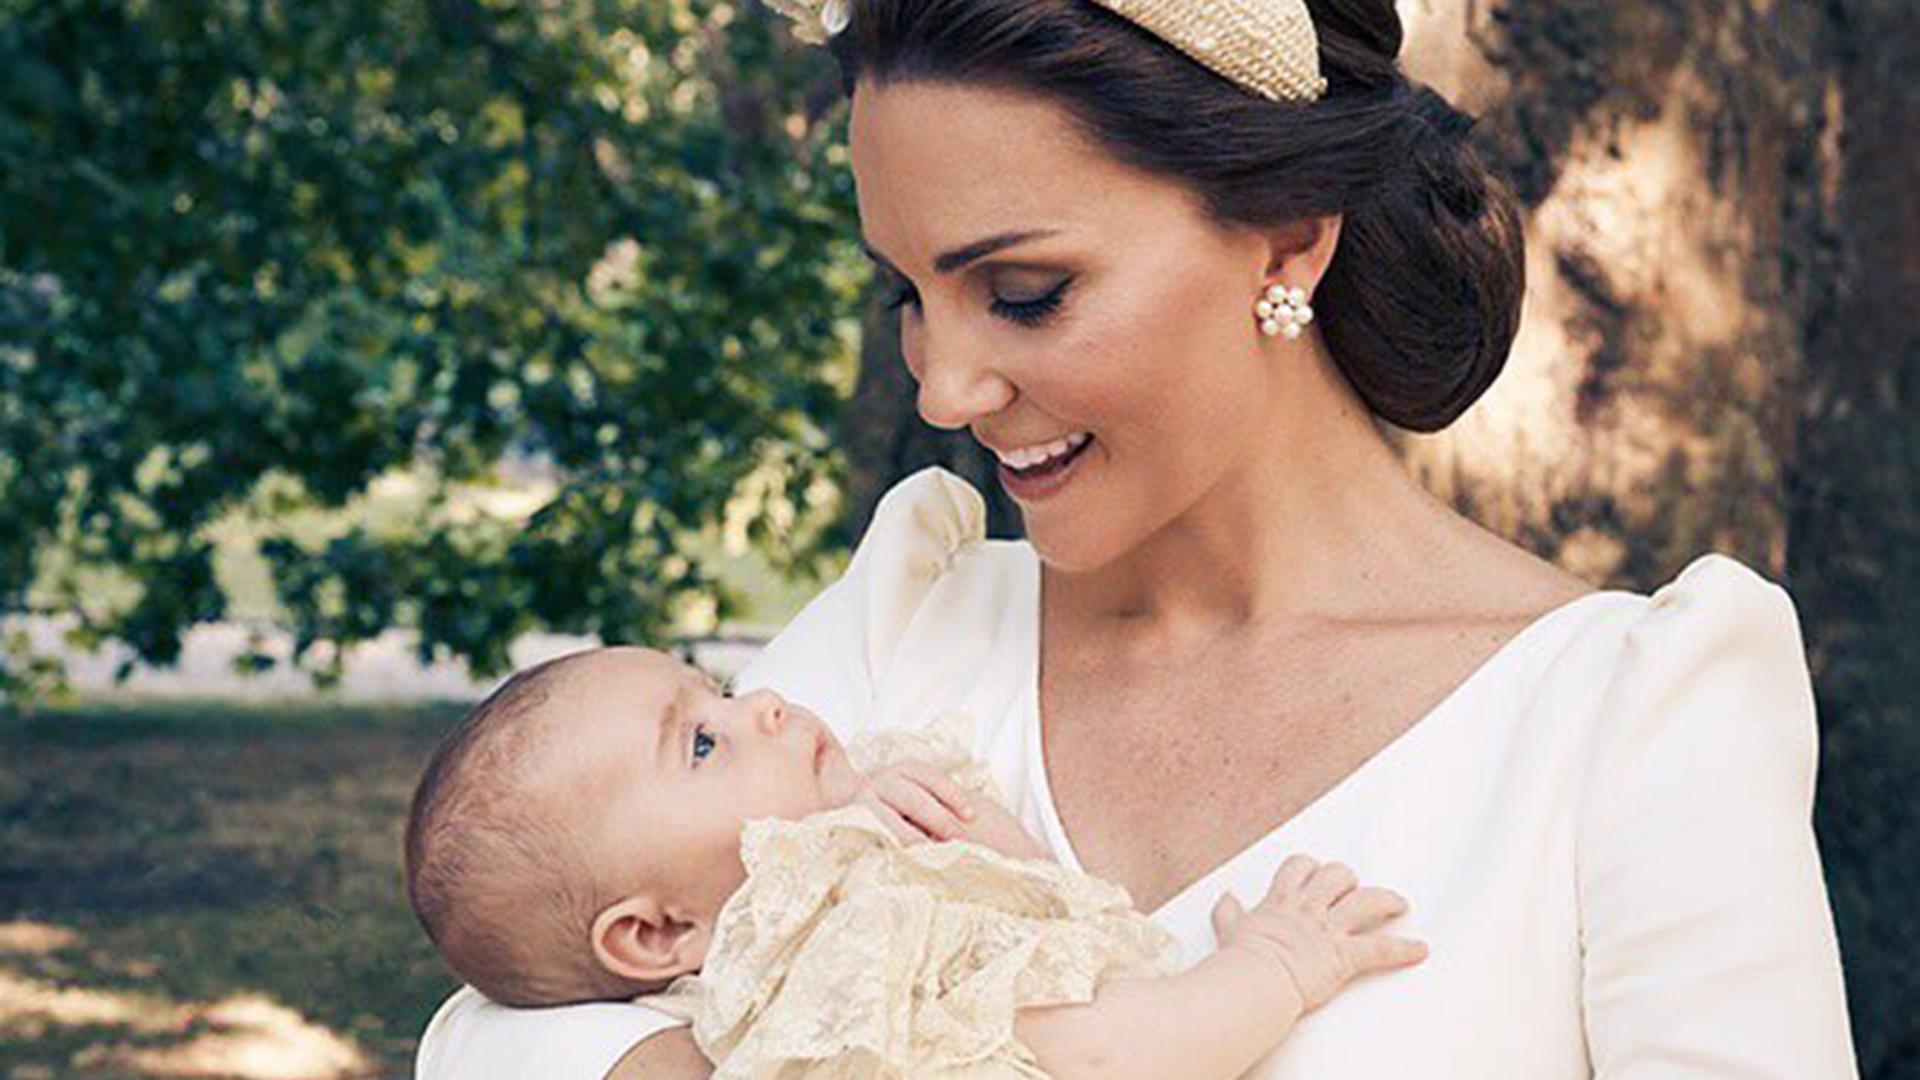 See Prince Louis and family in new, adorable photo from his christening